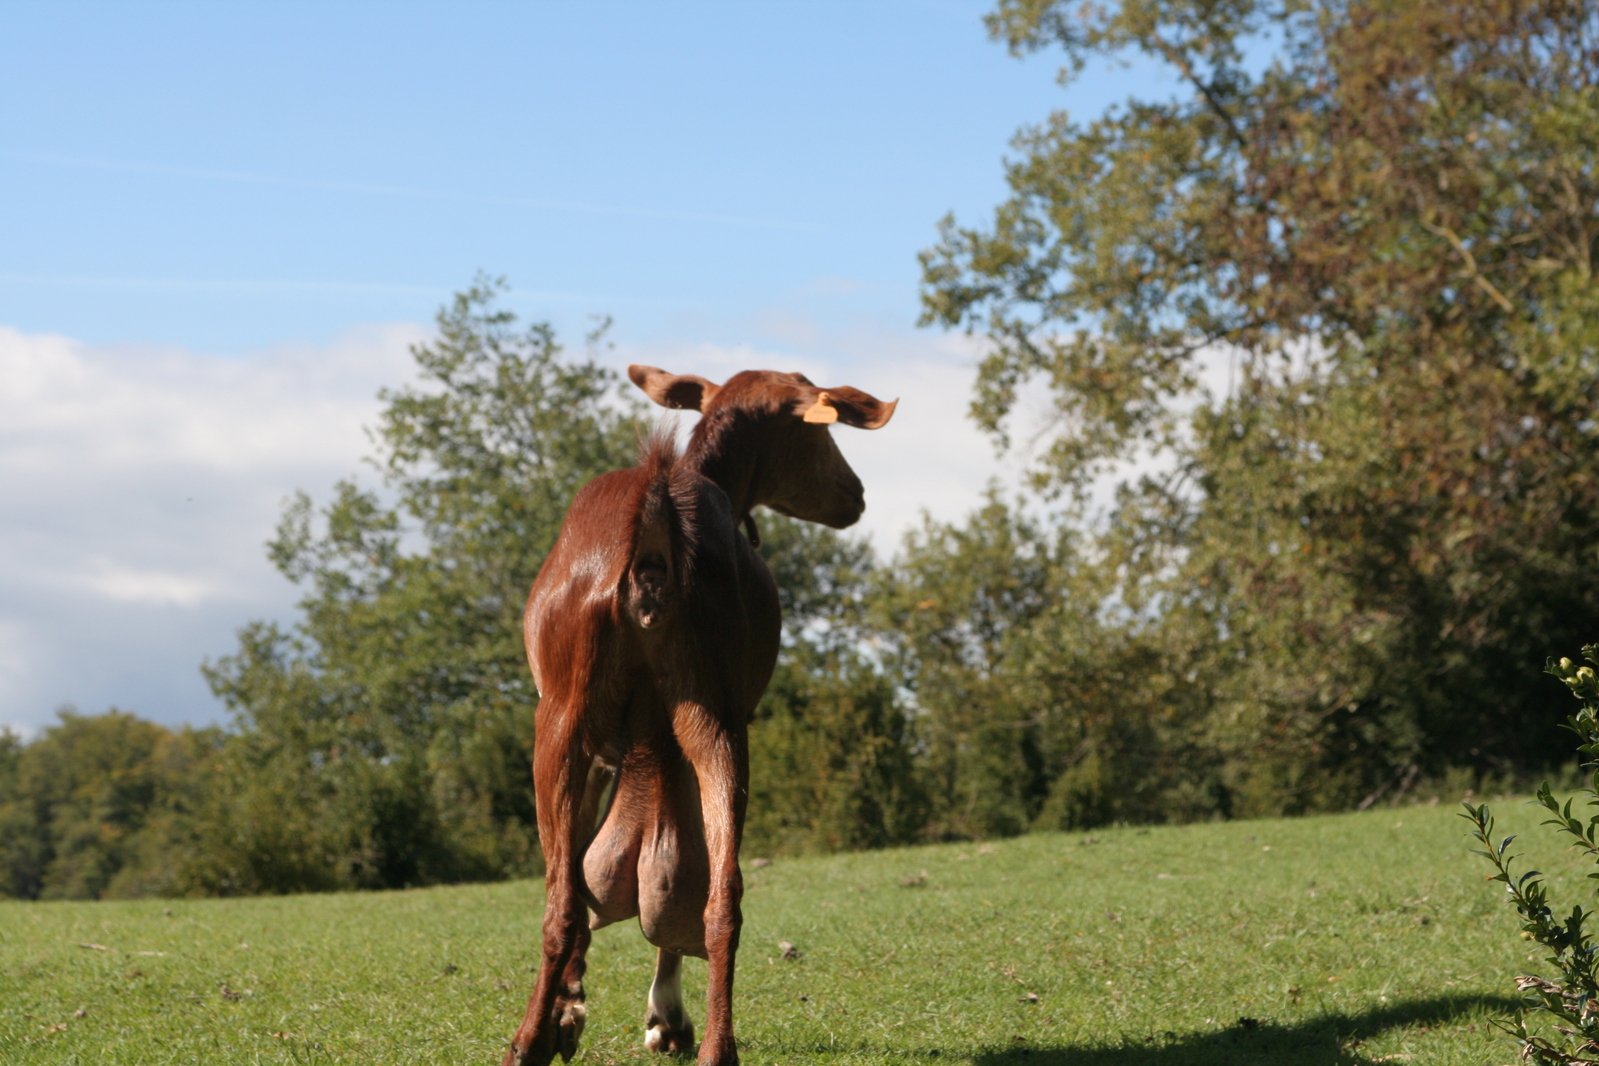 a baby calf standing on top of a grass covered field